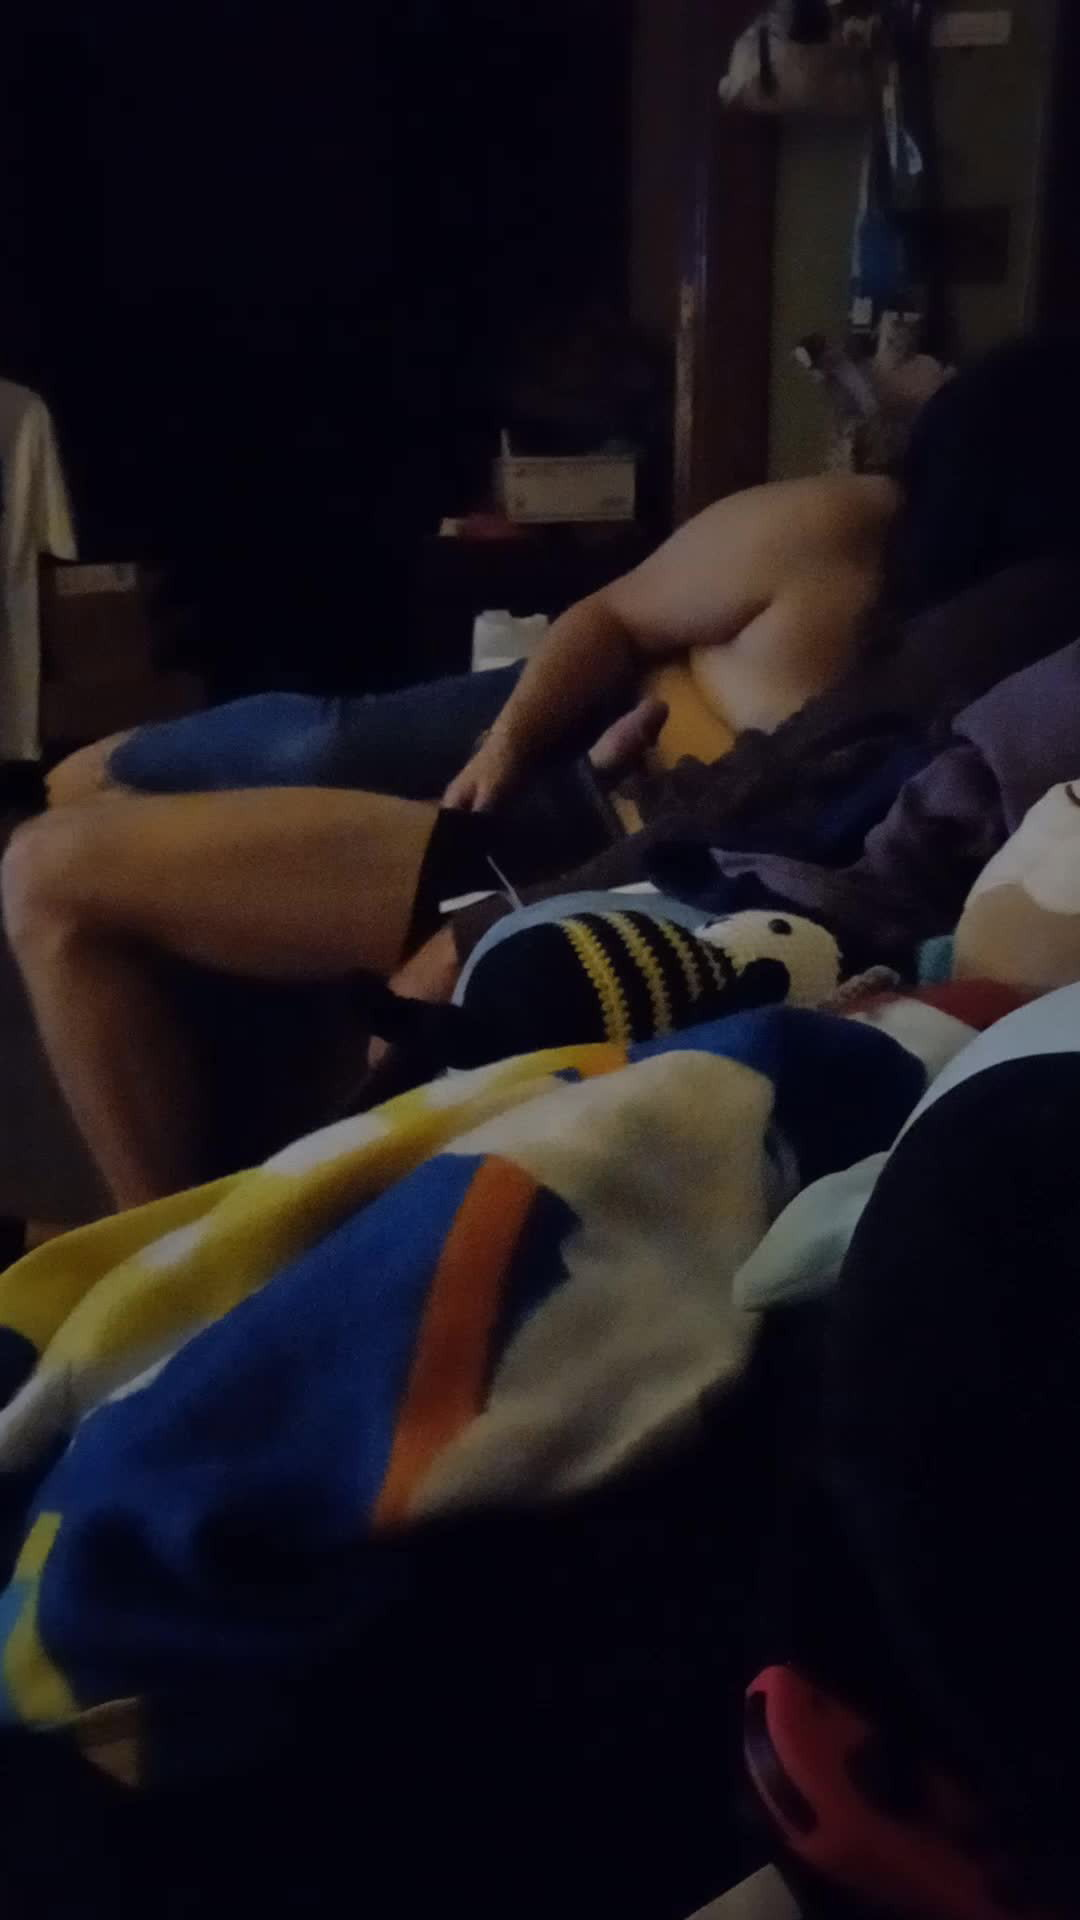 Video post by HotwifeHusband